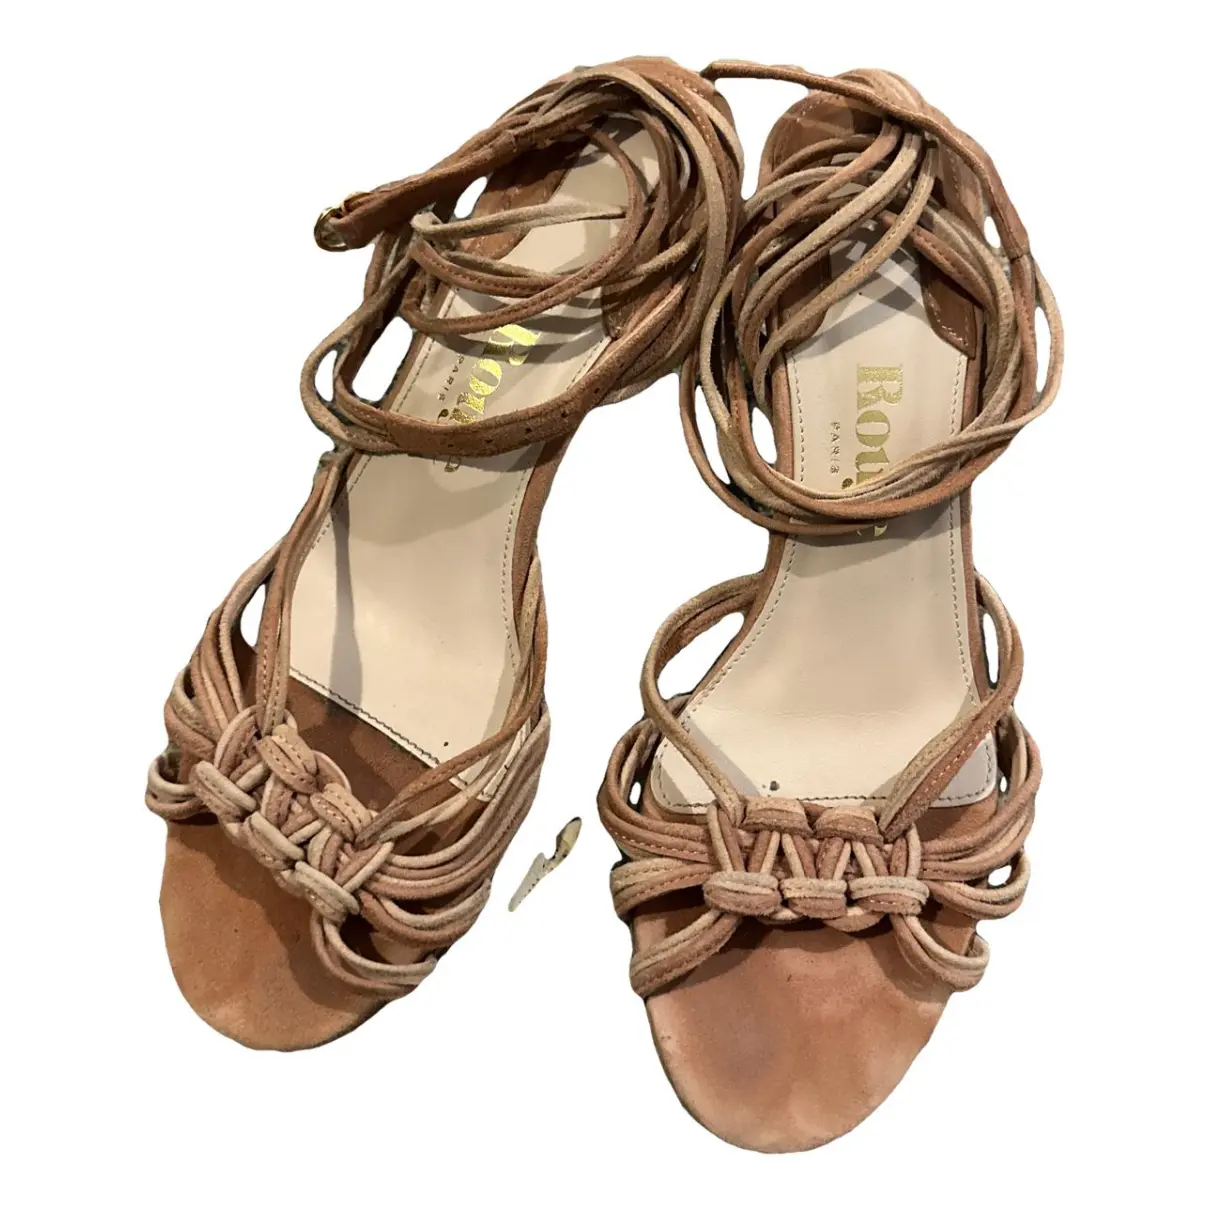 Penelope leather sandals